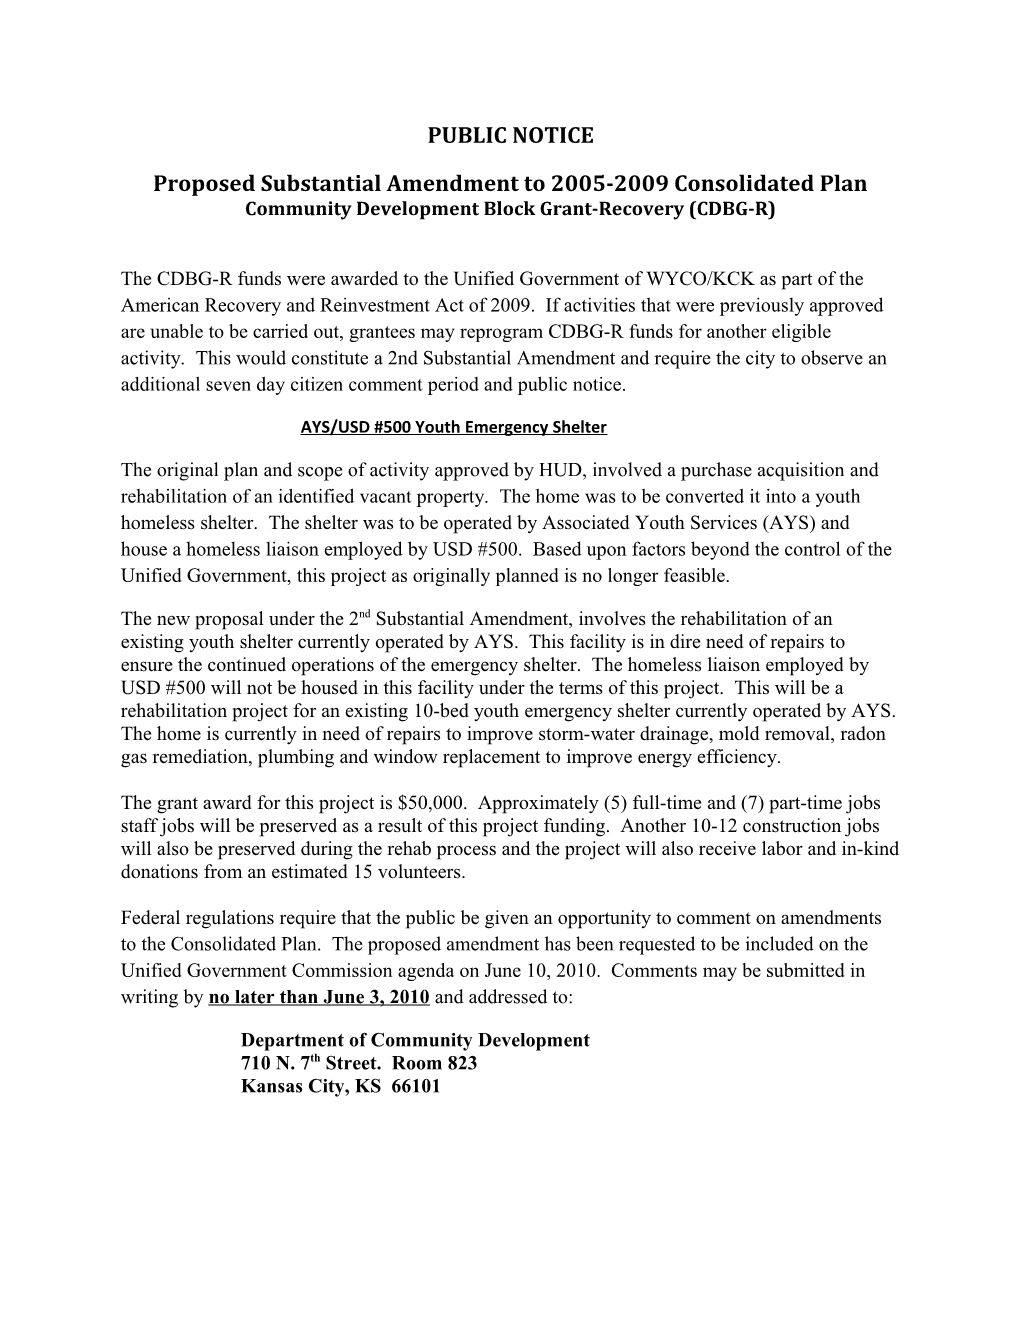 Proposed Substantial Amendment to 2005-2009 Consolidated Plan